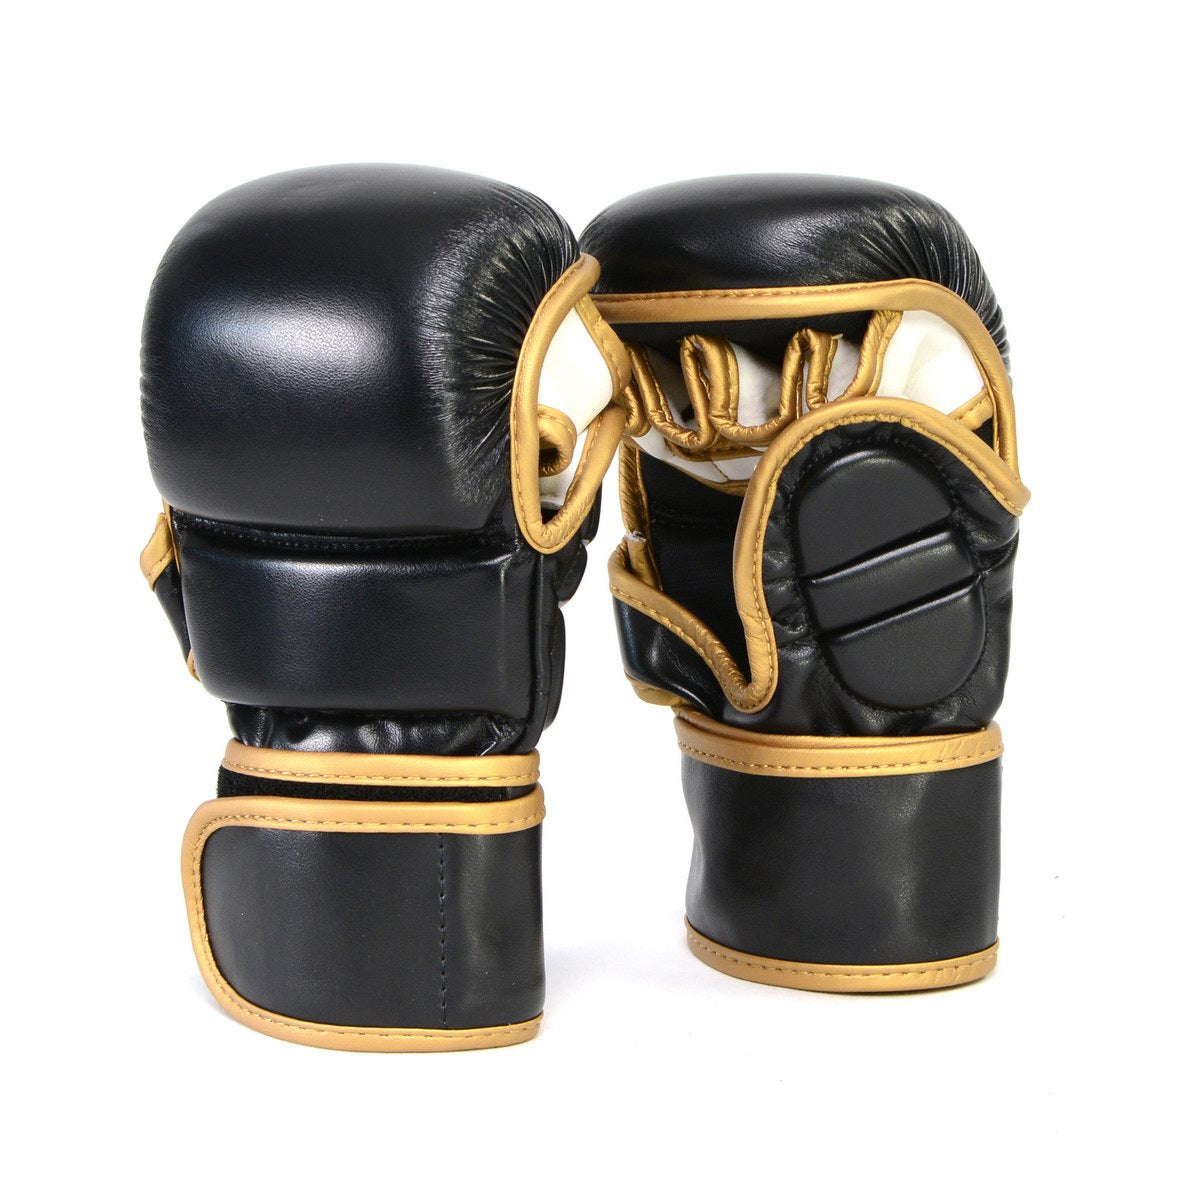 X-Fitness XF2001 7 oz MMA – Sparring Hybrid Gloves-BLK/COPPER